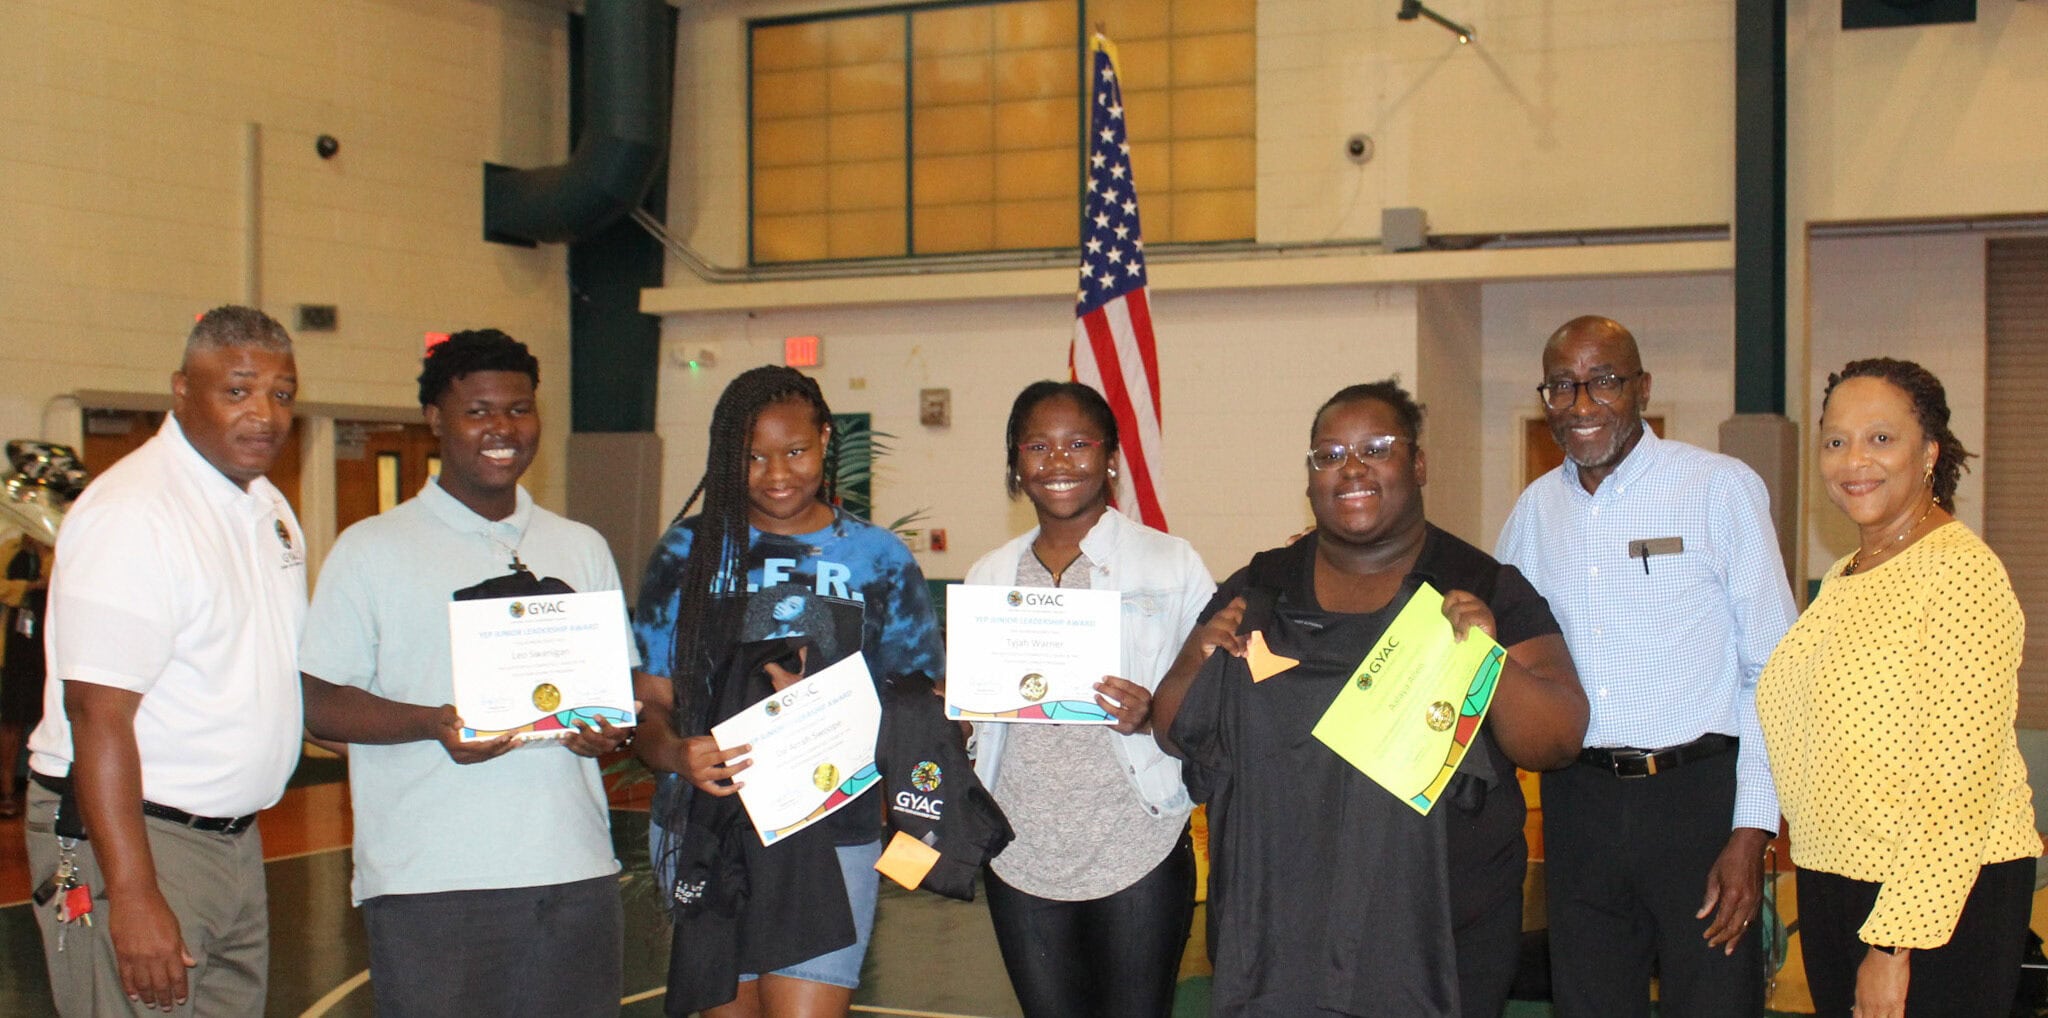 Students & Staff Recognized During Annual Afterschool End-of-Year Awards Day